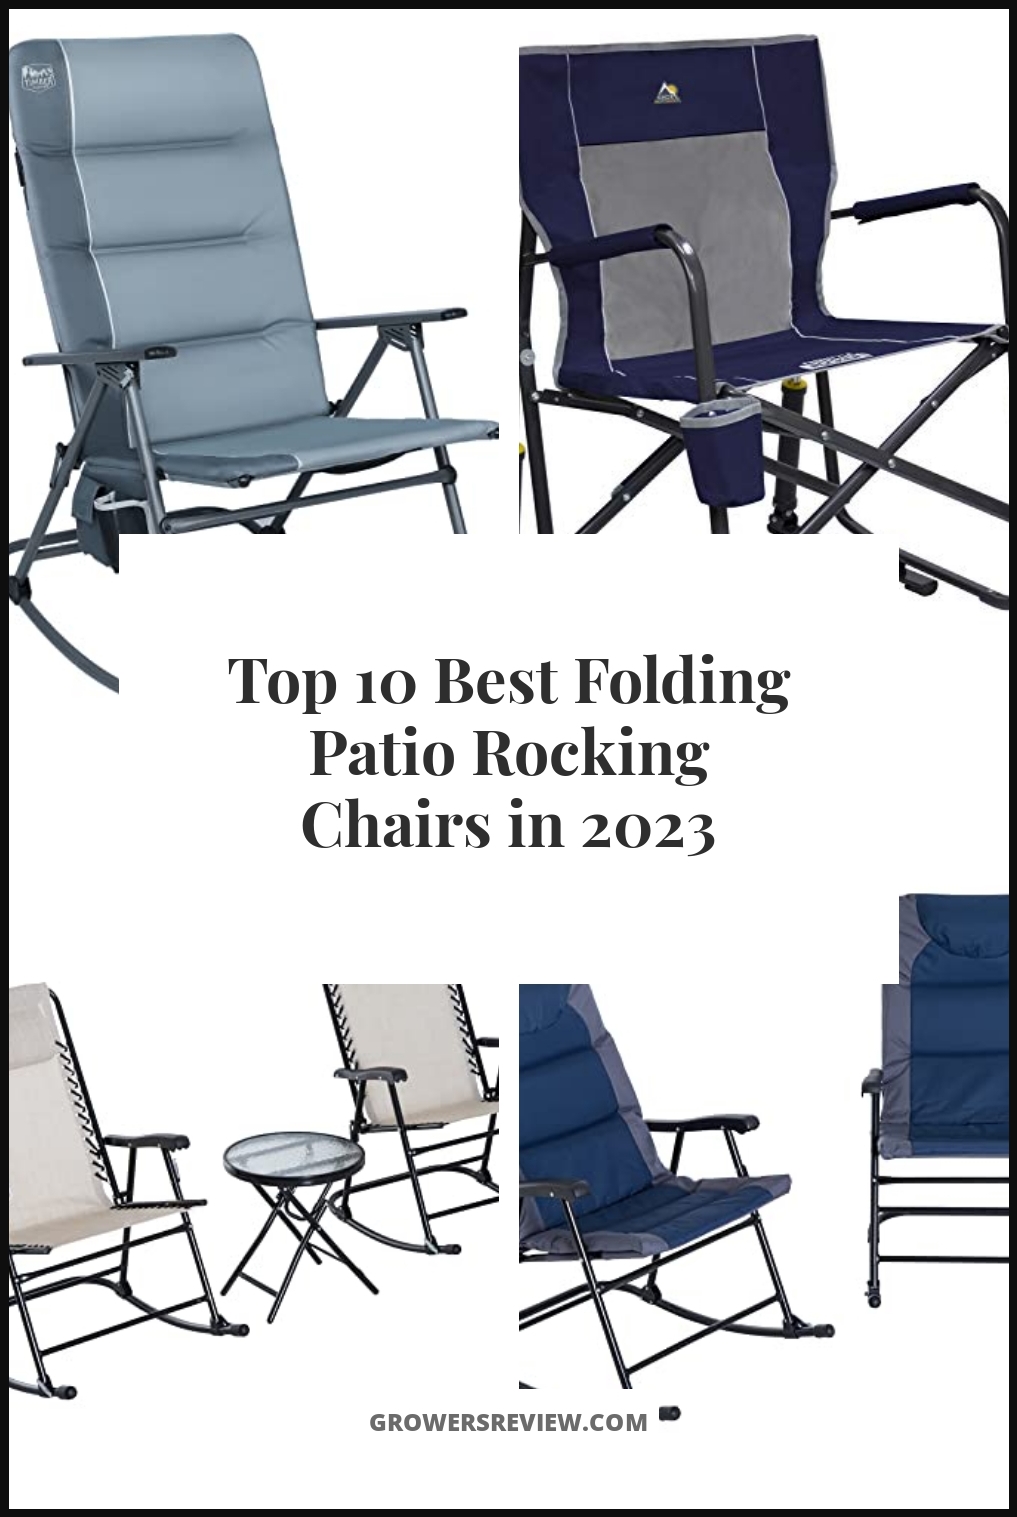 Best Folding Patio Rocking Chairs - Buying Guide